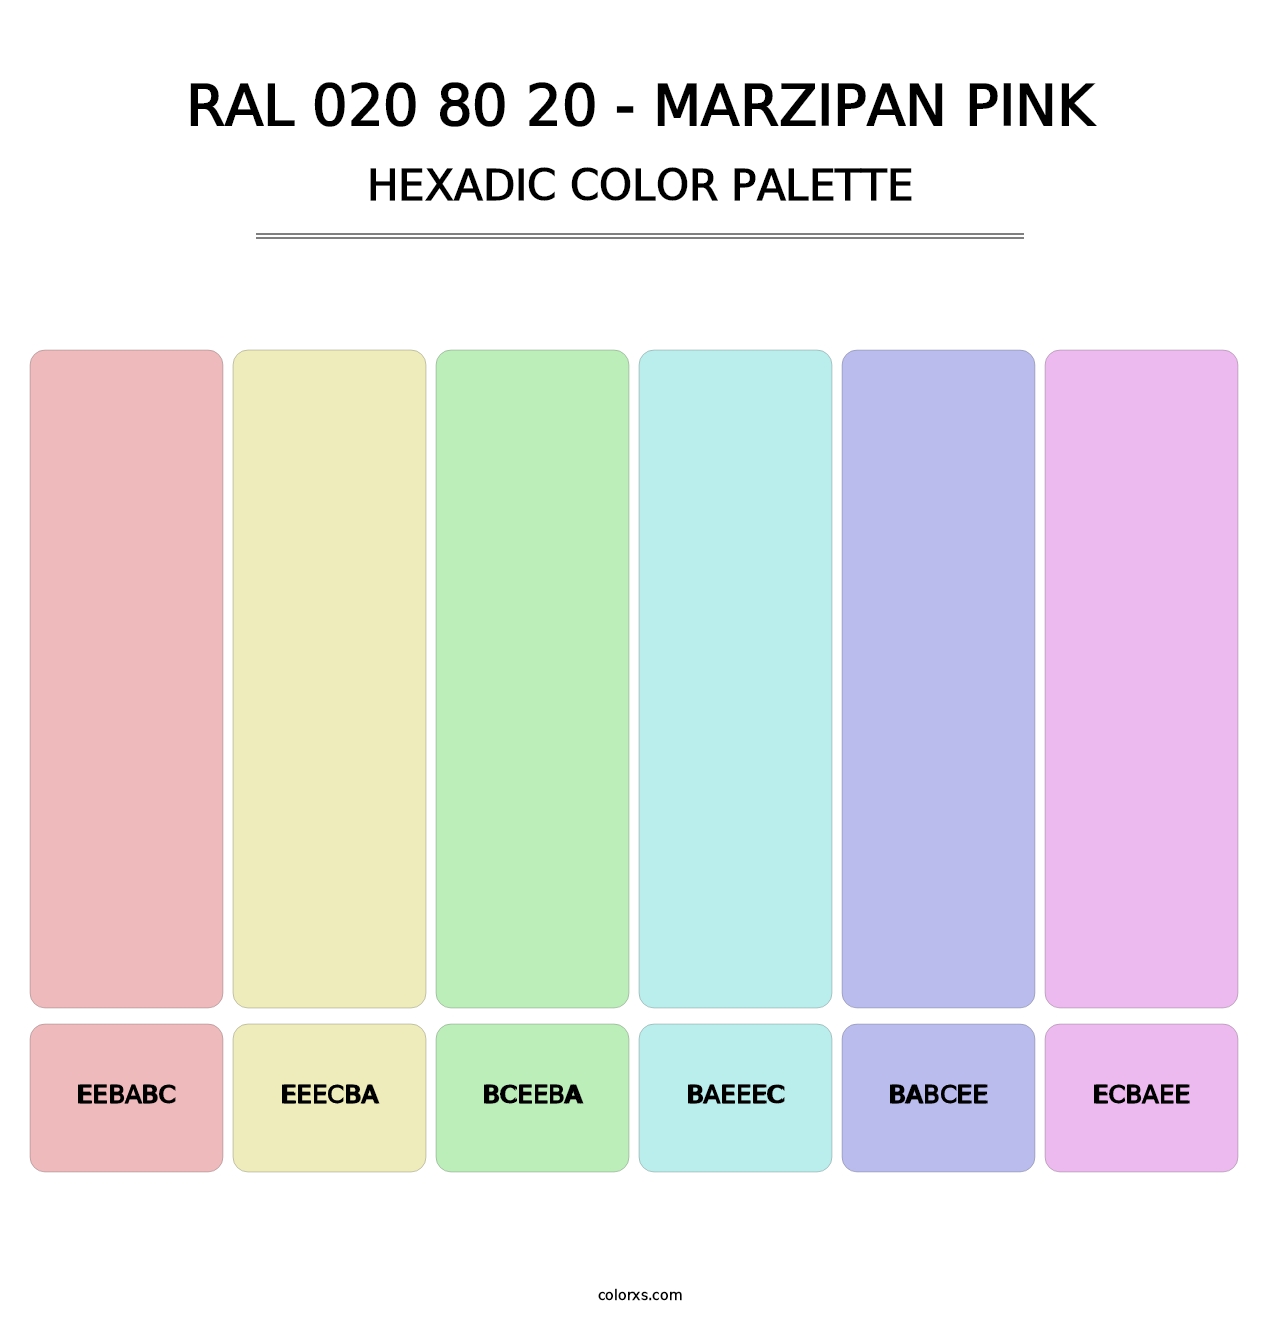 RAL 020 80 20 - Marzipan Pink - Hexadic Color Palette